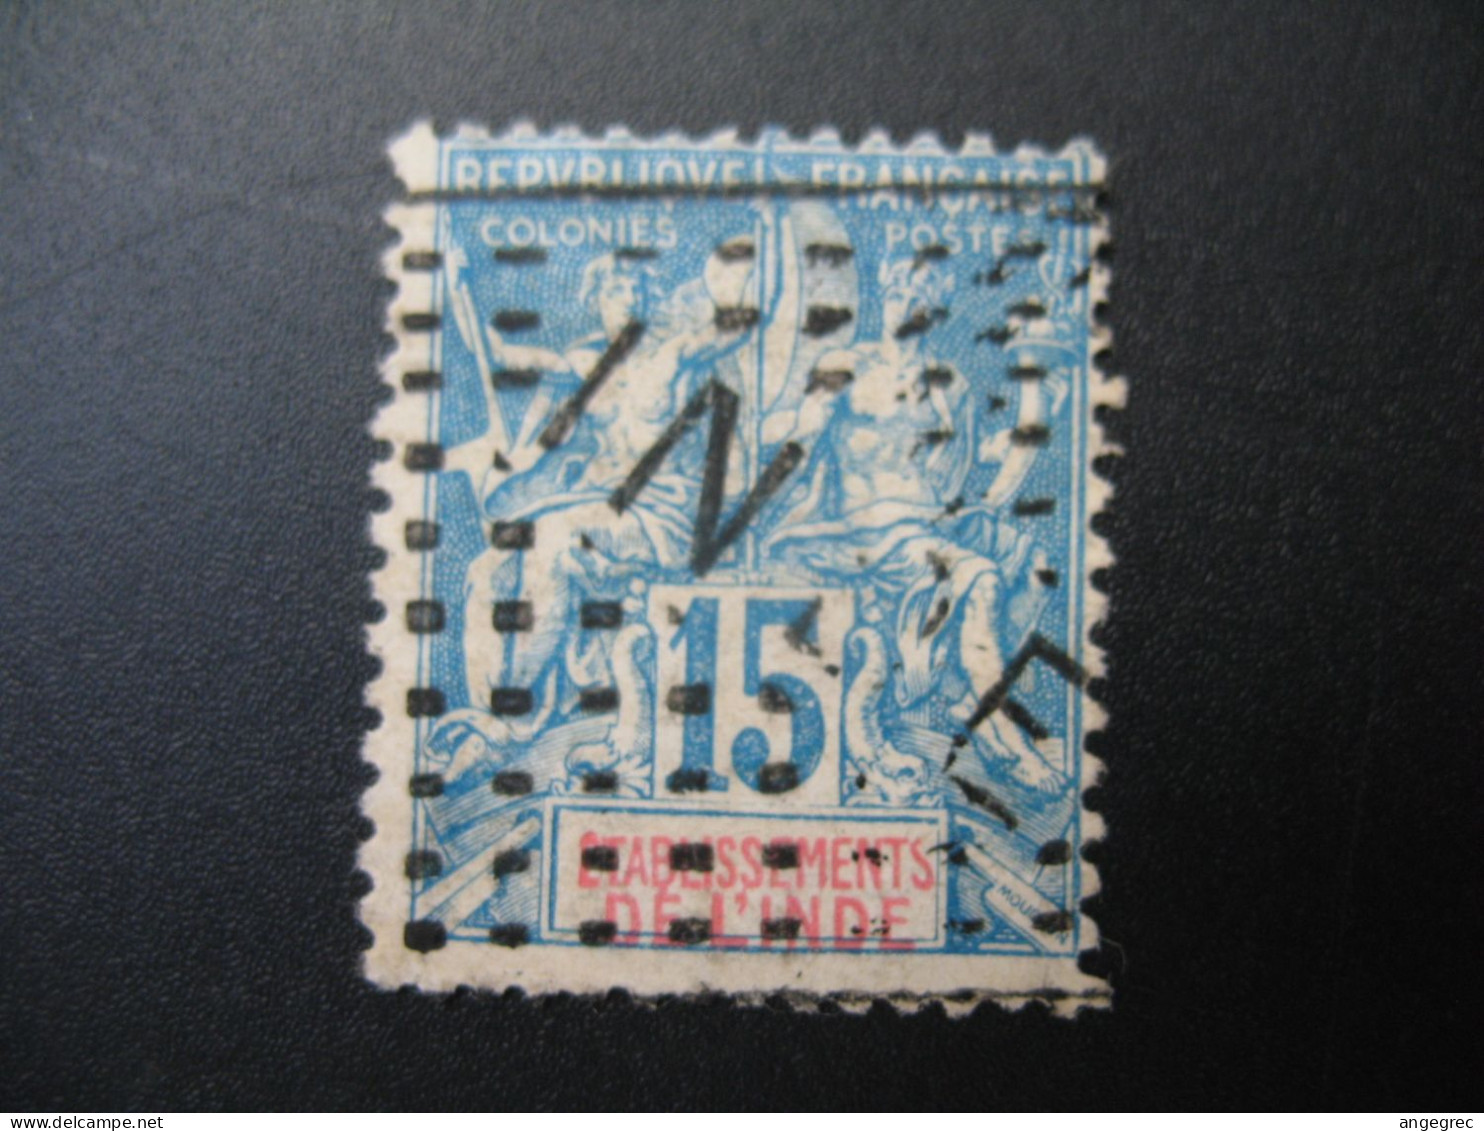 Inde Française Karikal Stamps French Colonies N° 6 Neuf * NSG Maury à Voir - Used Stamps